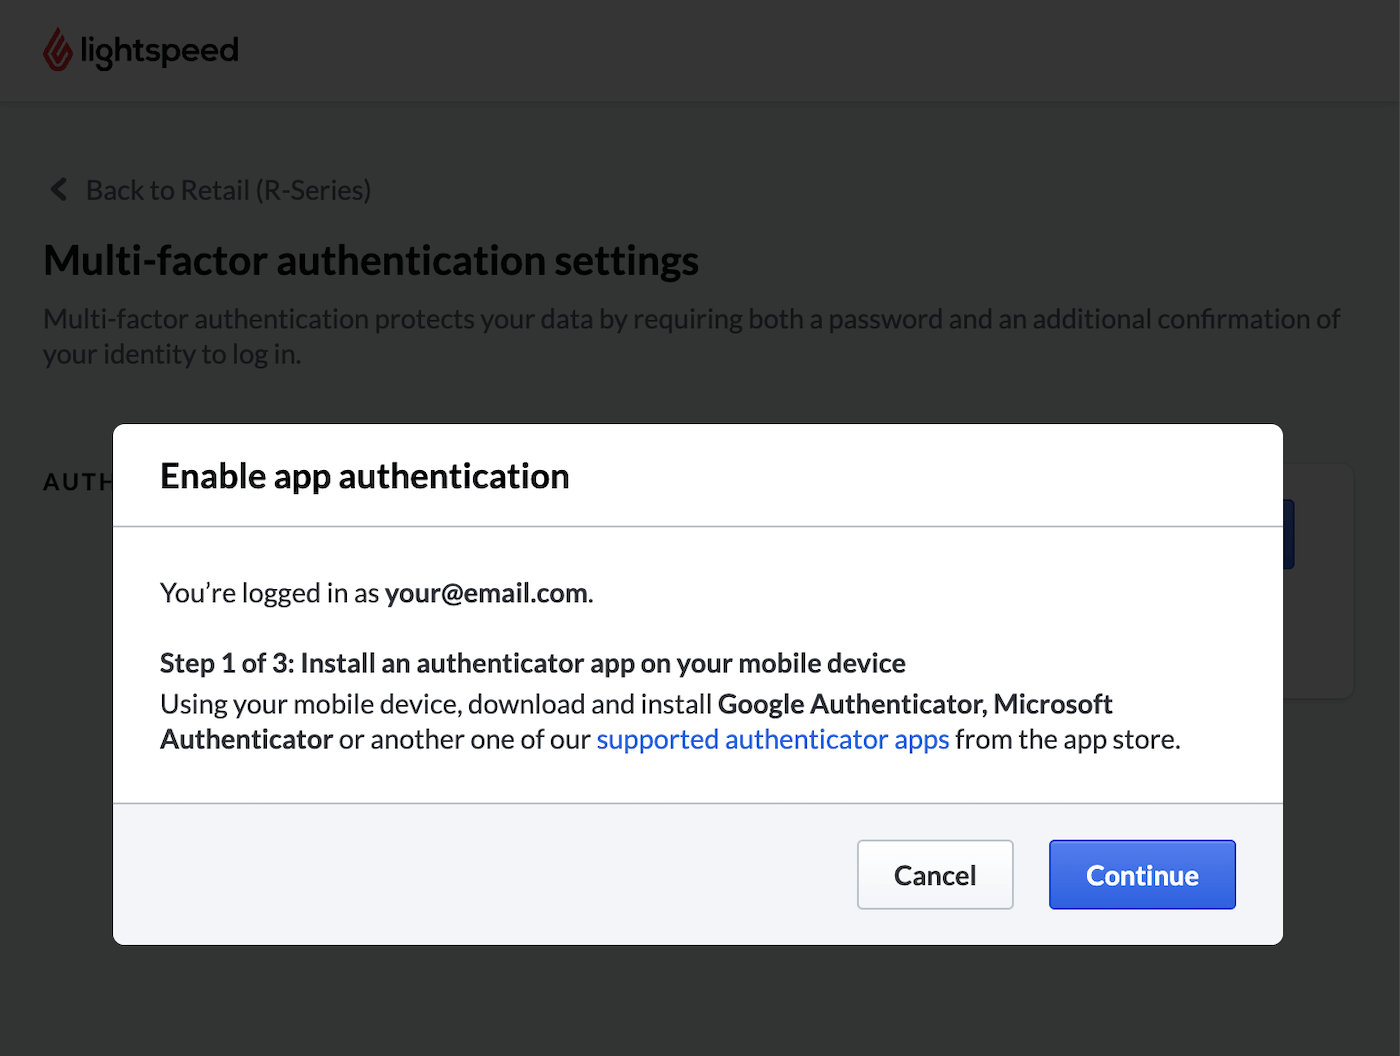 Enable authentication